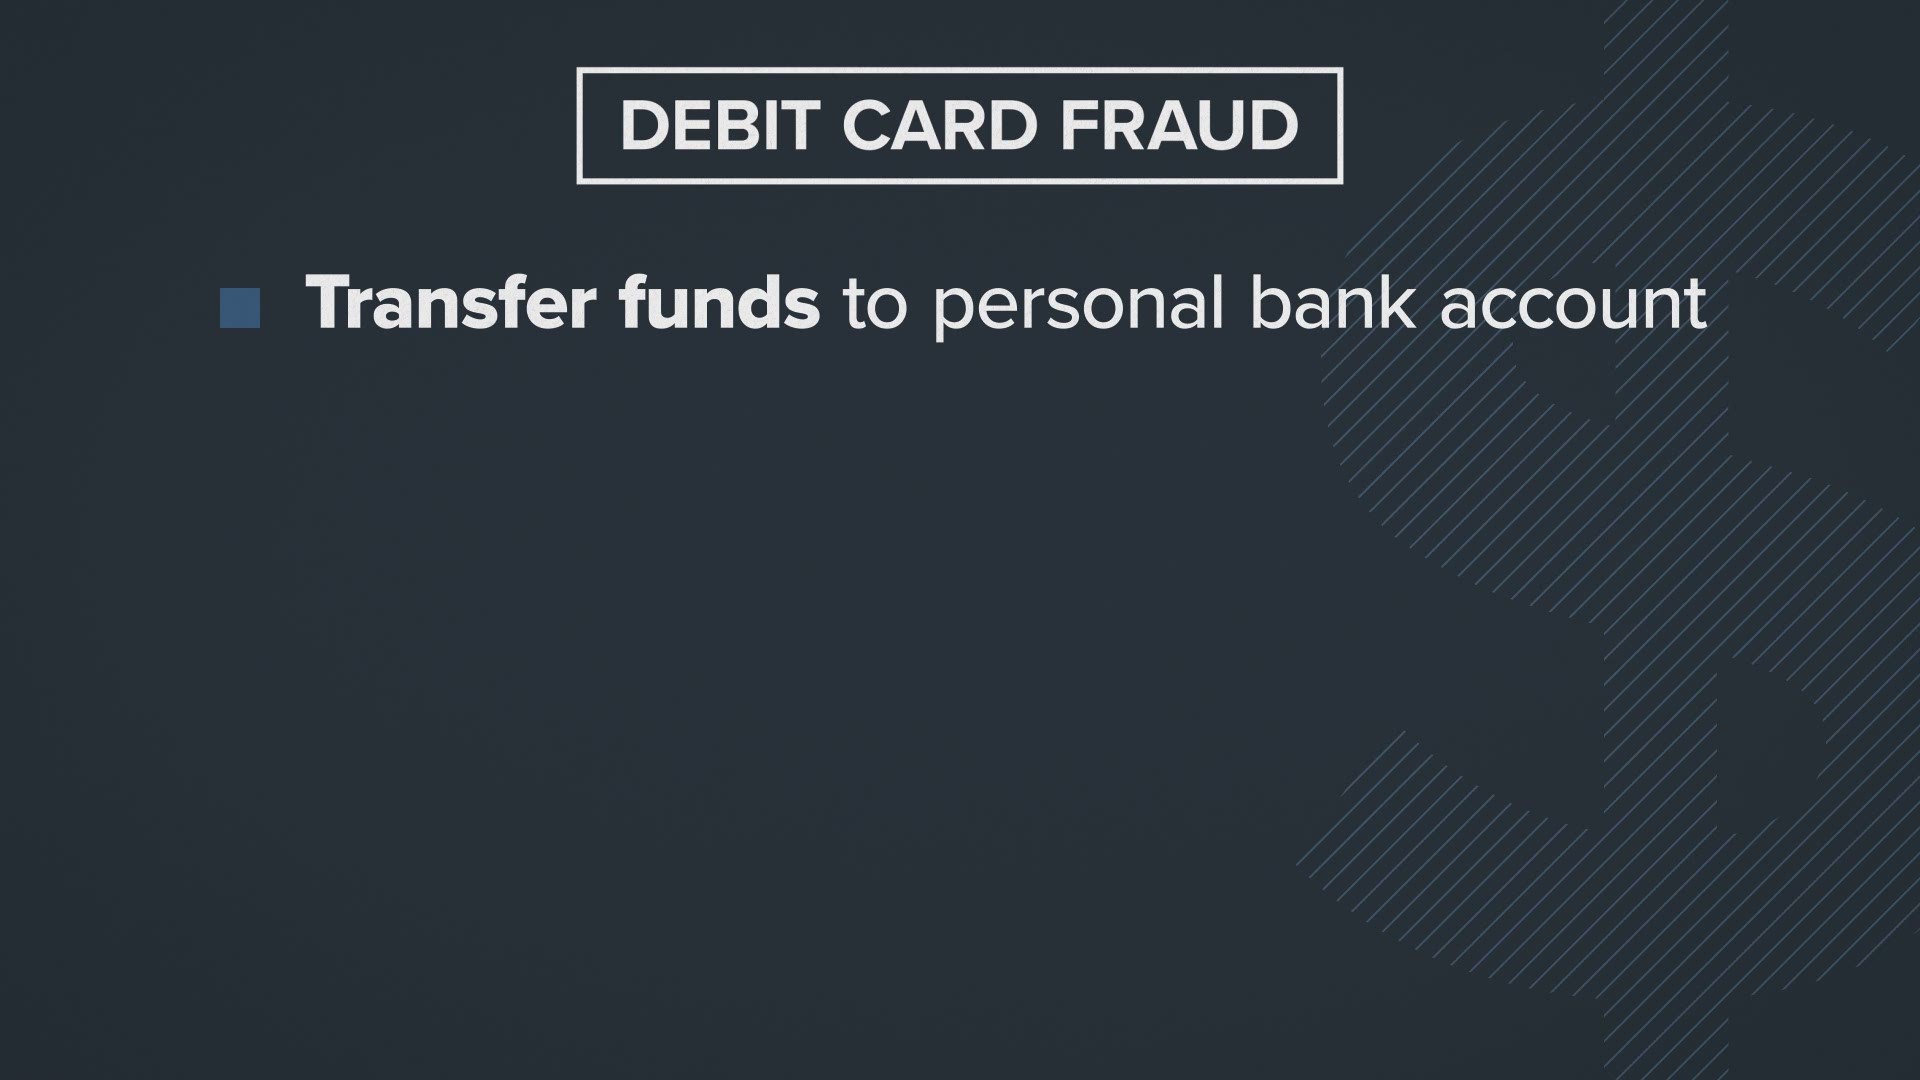 To help prevent debit card fraud, transfer funds out of your Bank of America debit card account as soon as possible into your personal bank account.